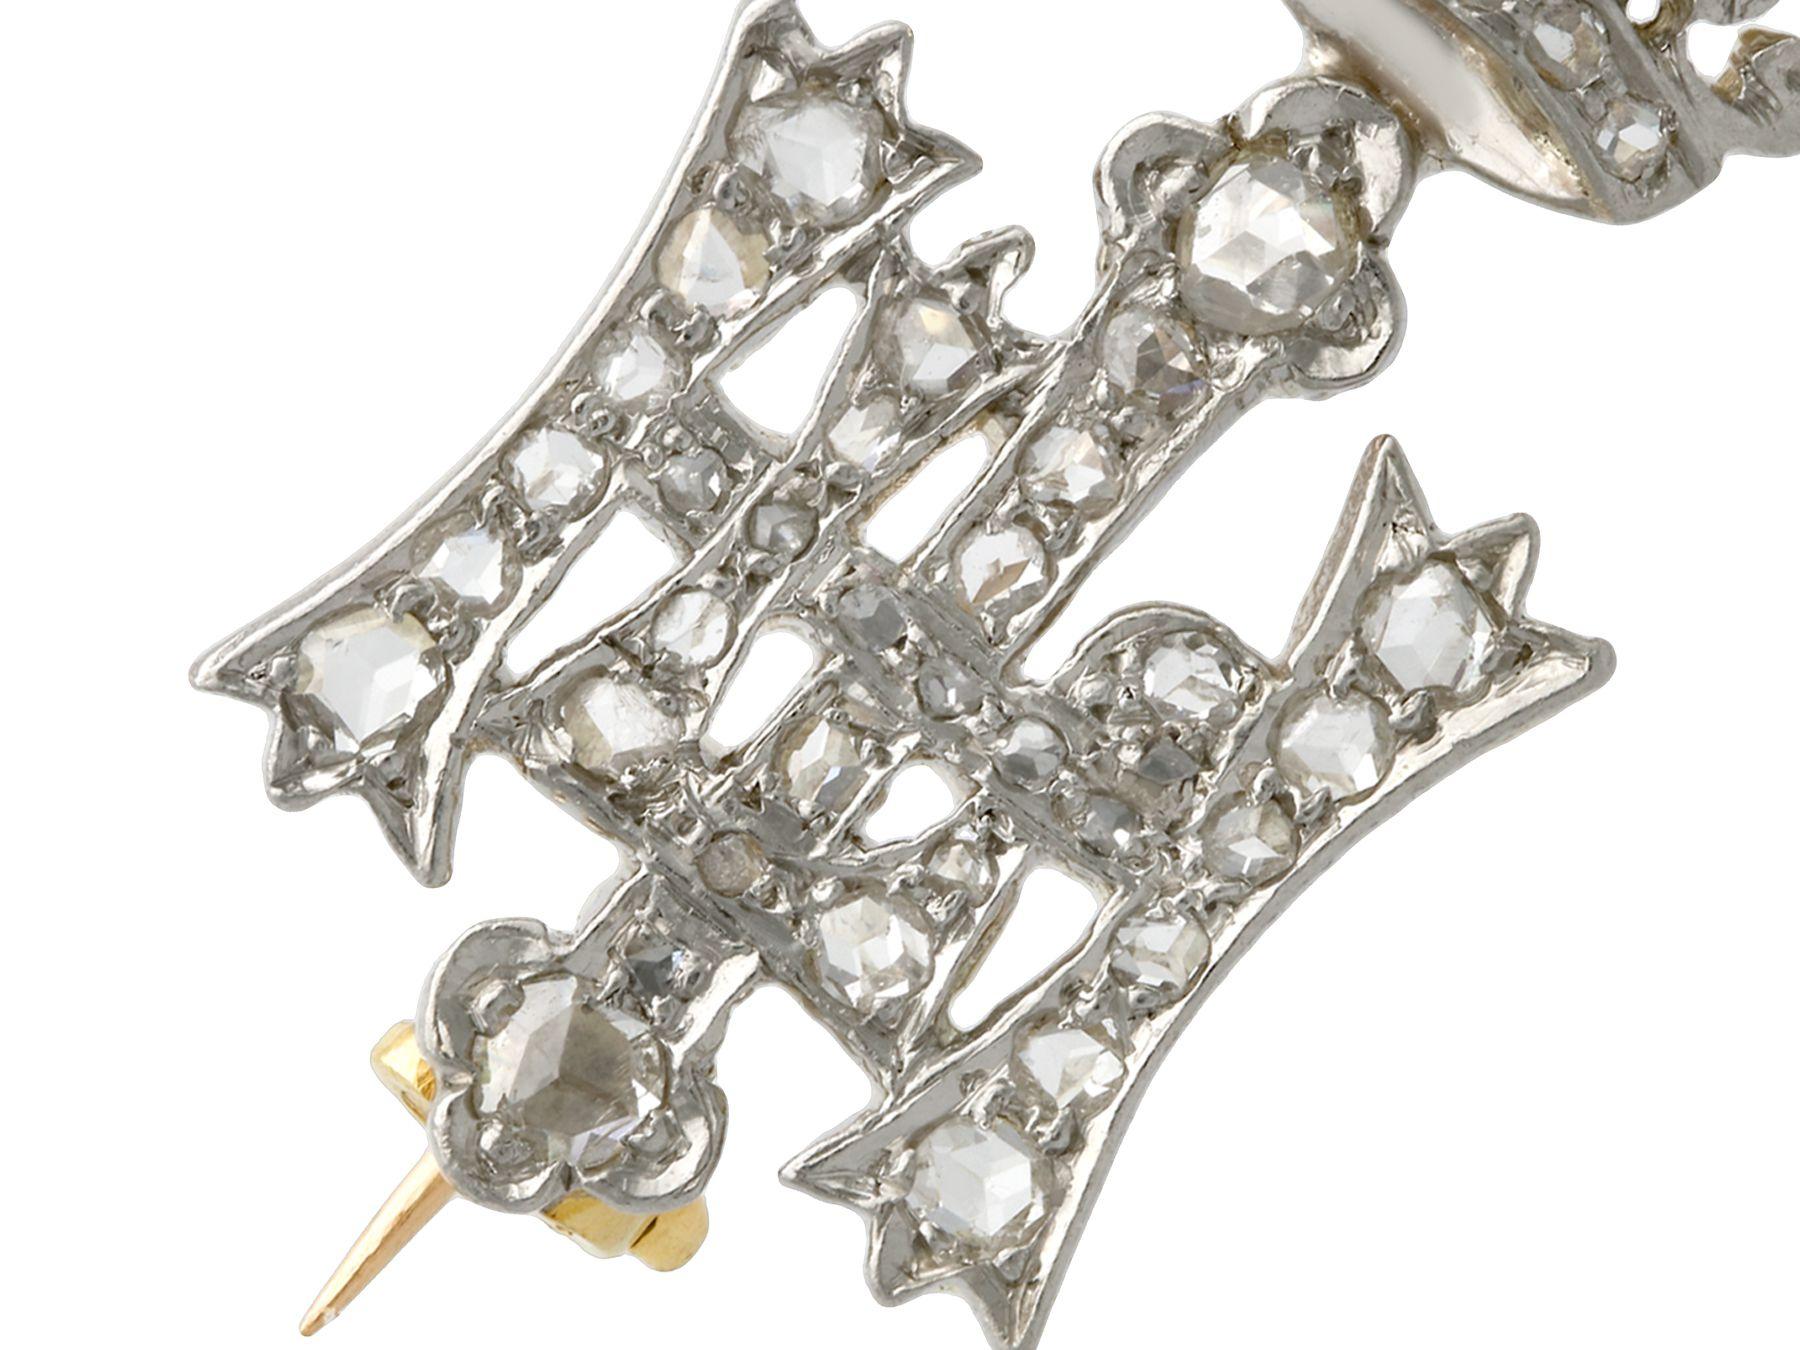 A fine and impressive 0.28 carat diamond, 14k white gold and palladium set Highland Light Infantry sweetheart brooch; part of our diverse antique estate jewelry collections.

This fine and impressive antique pin / brooch has been crafted in 14k